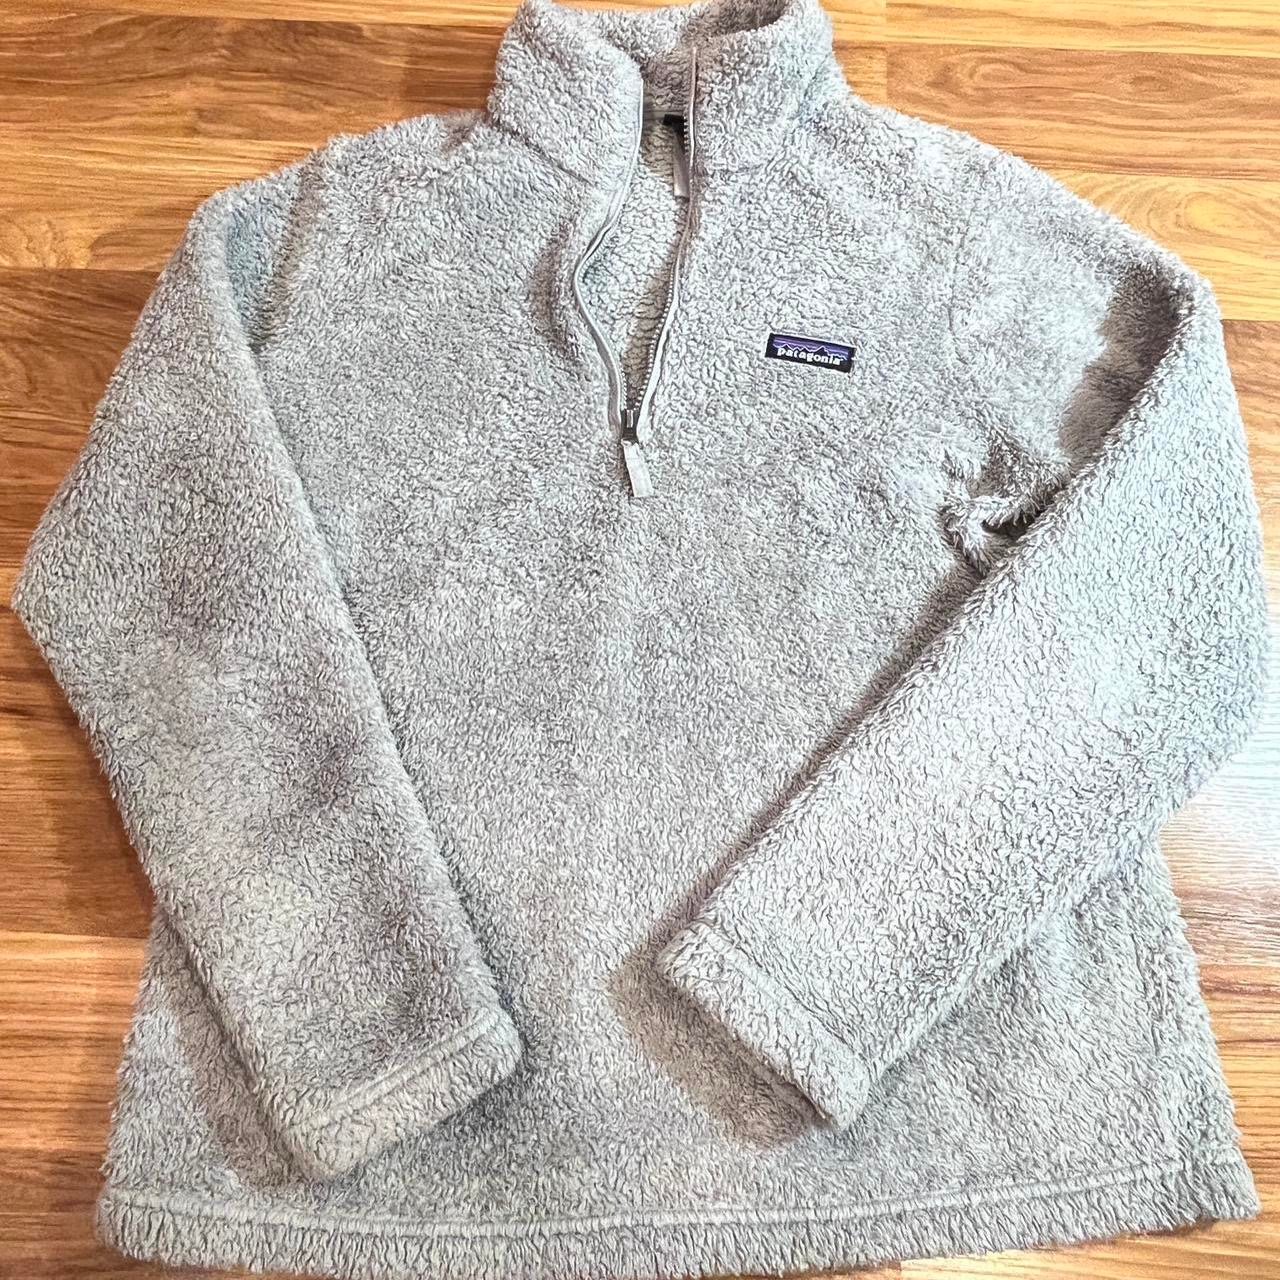 Elegant Patagonia Better Sweater ppAqR9HNf Counter Genuine 